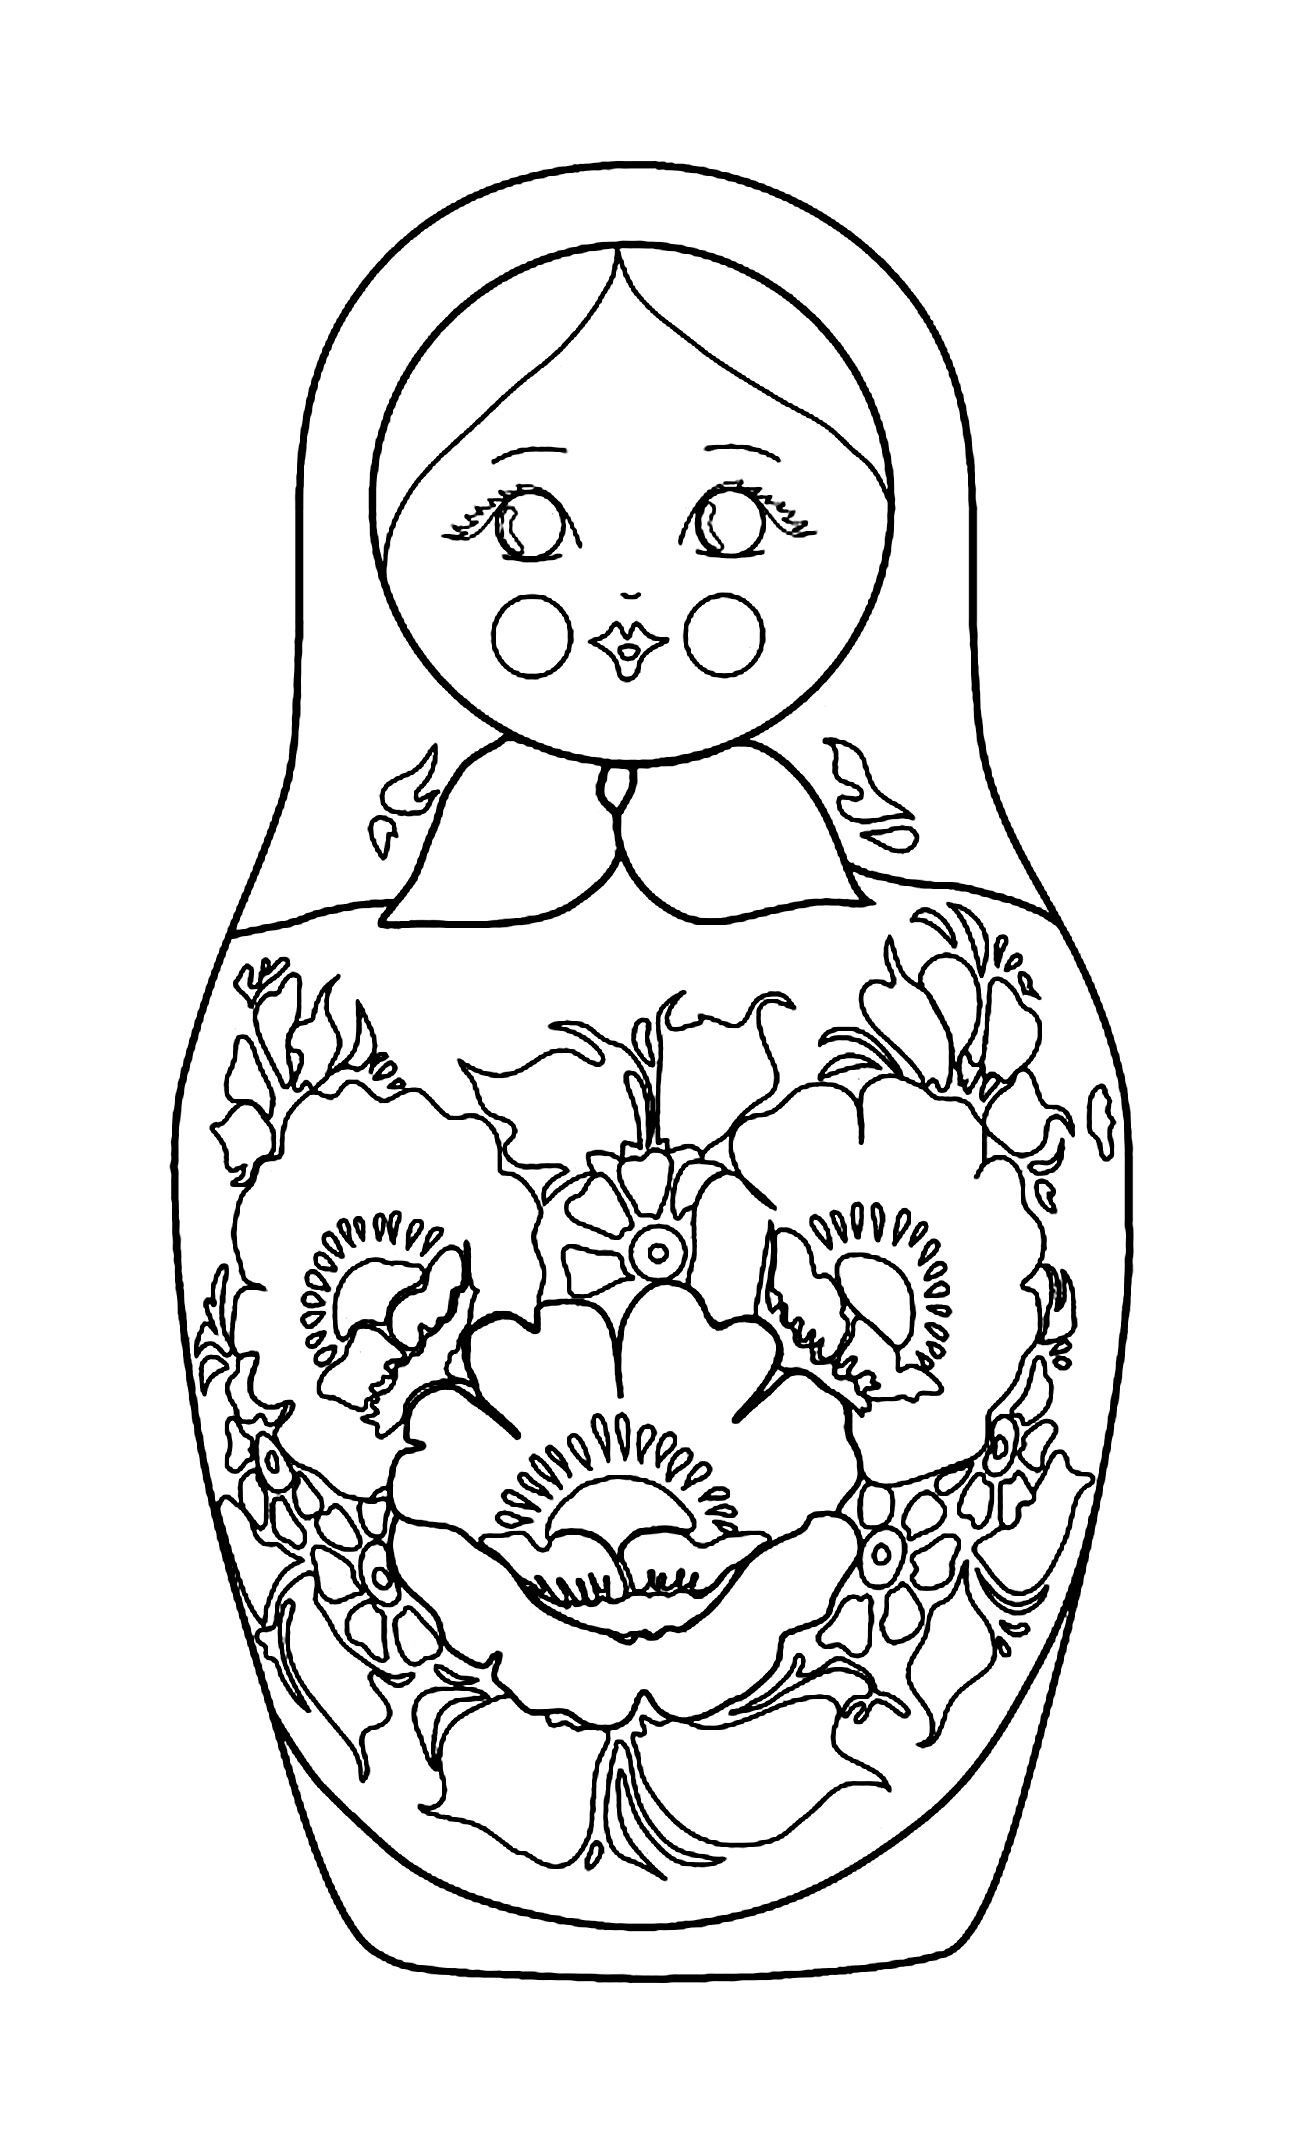 image=russian dolls coloring russian dolls 11 1